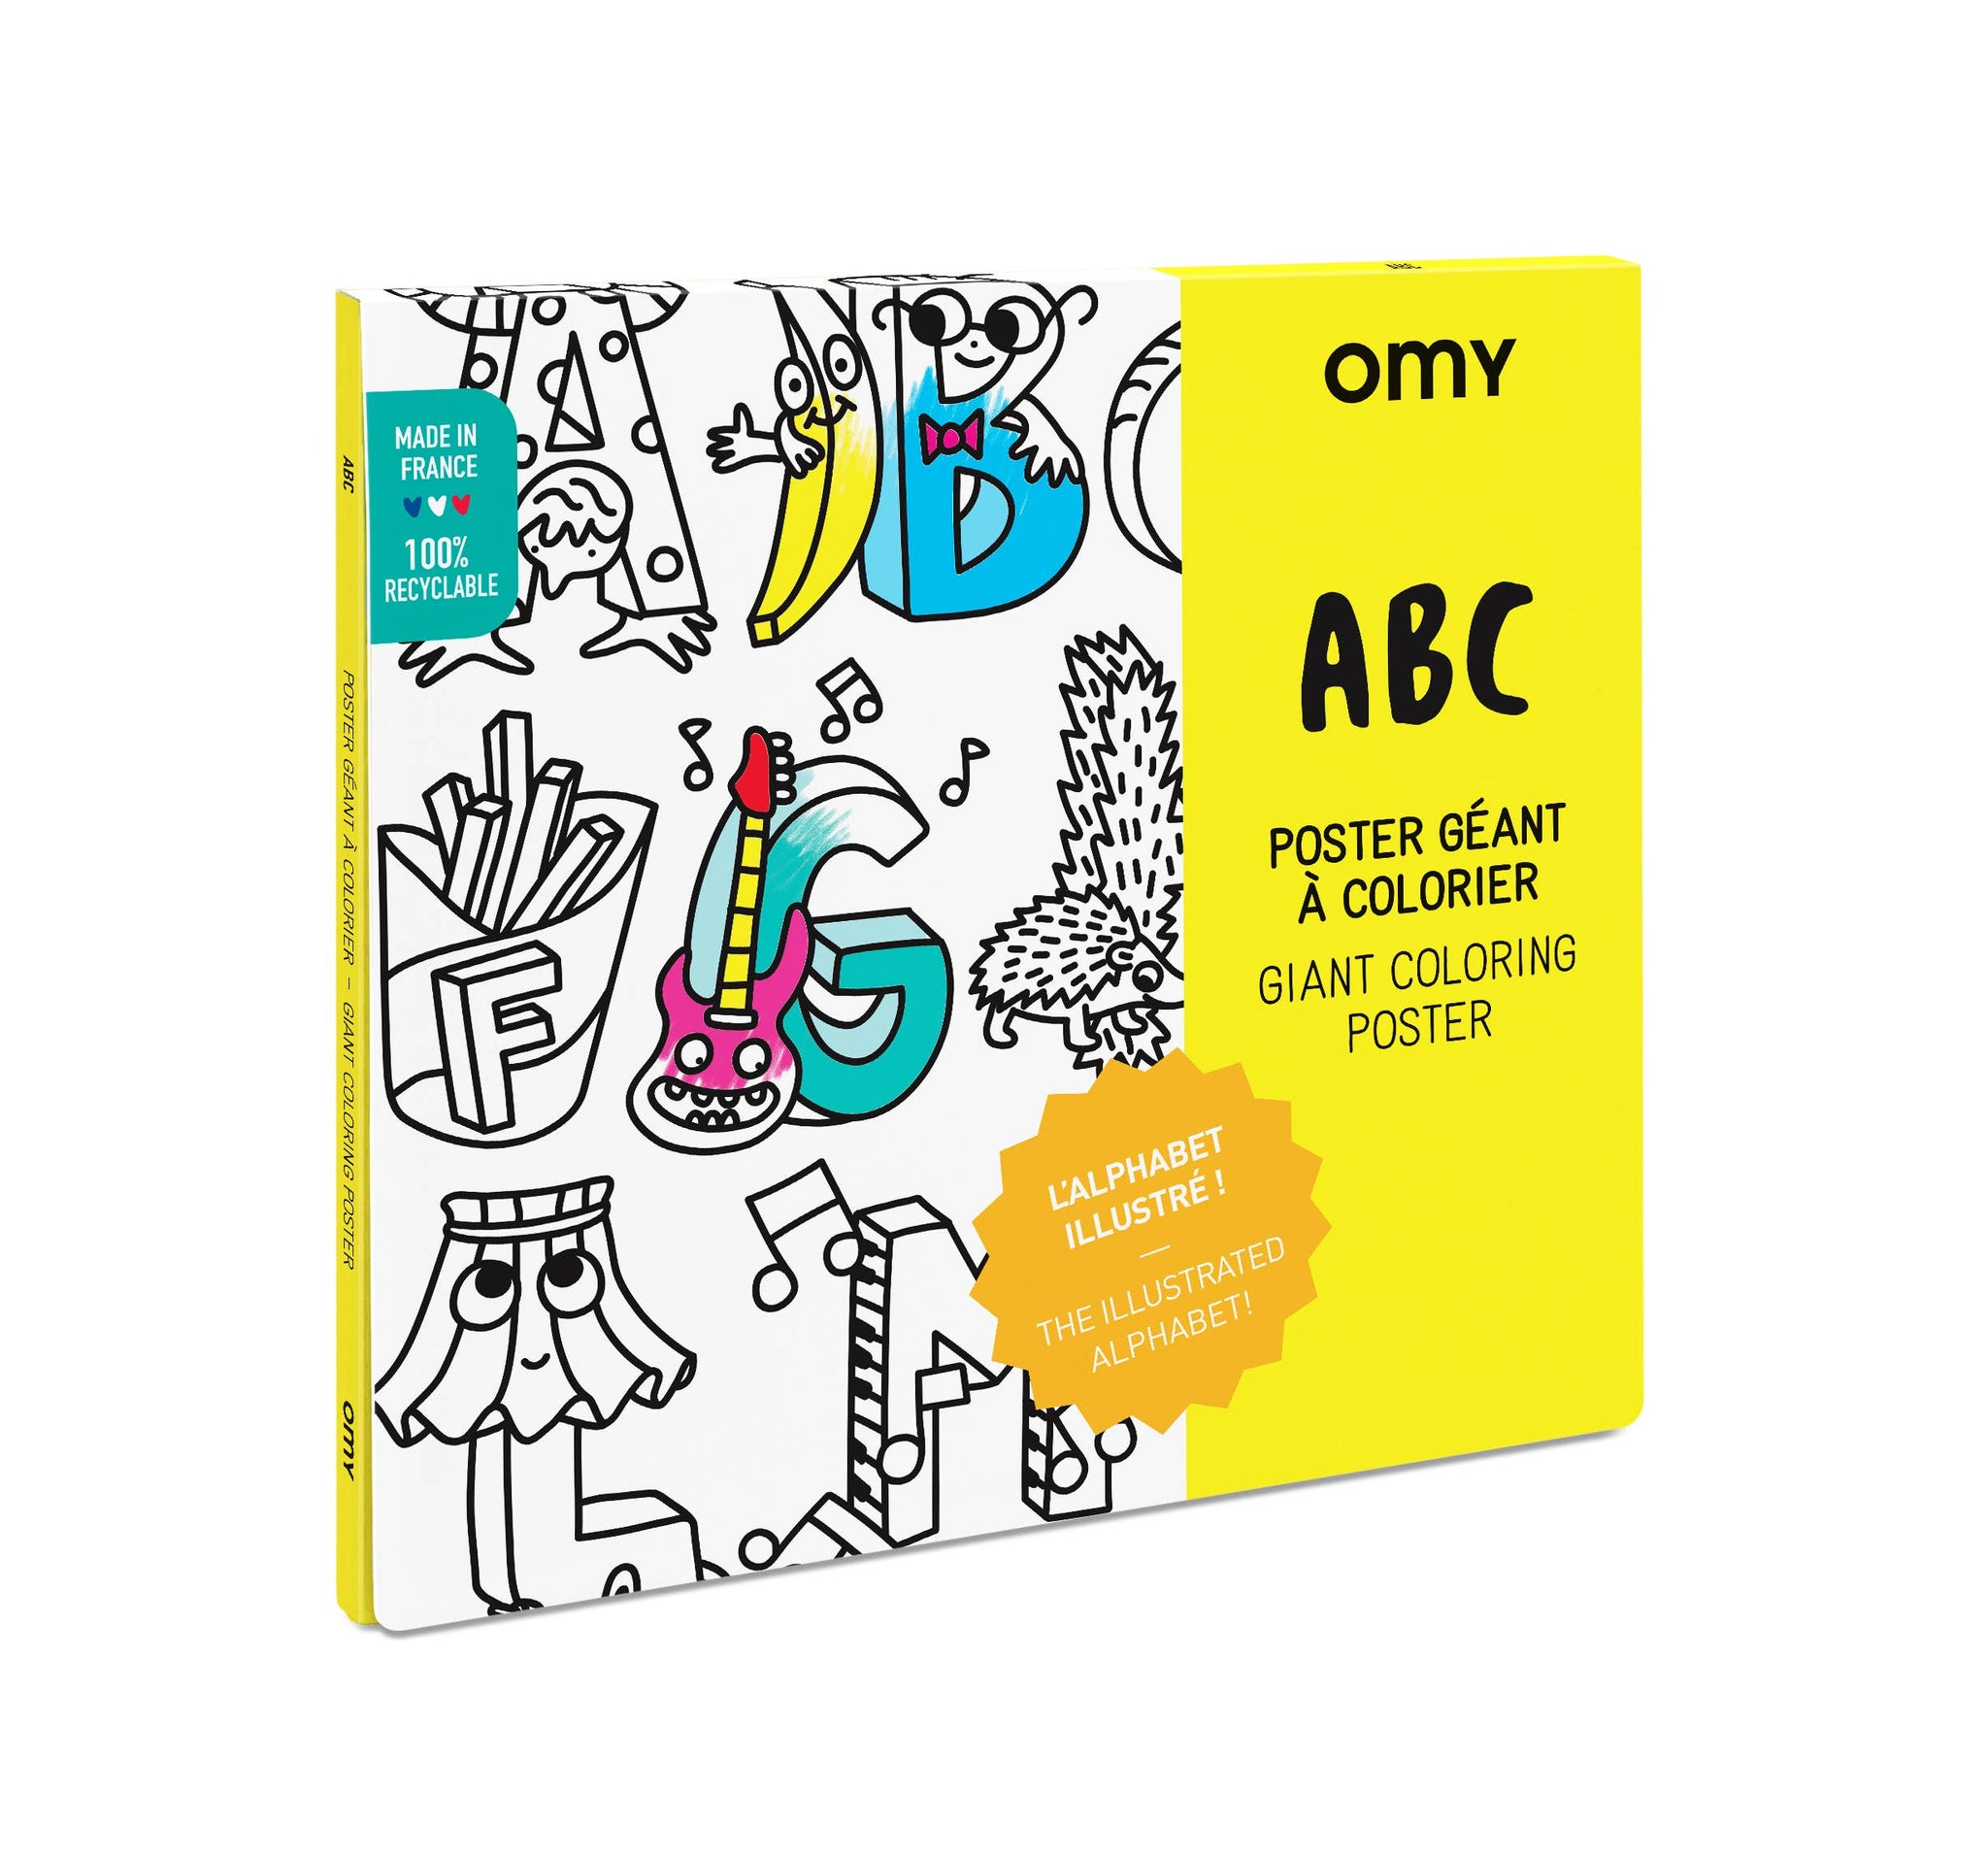 "ABC" Giant Coloring Poster